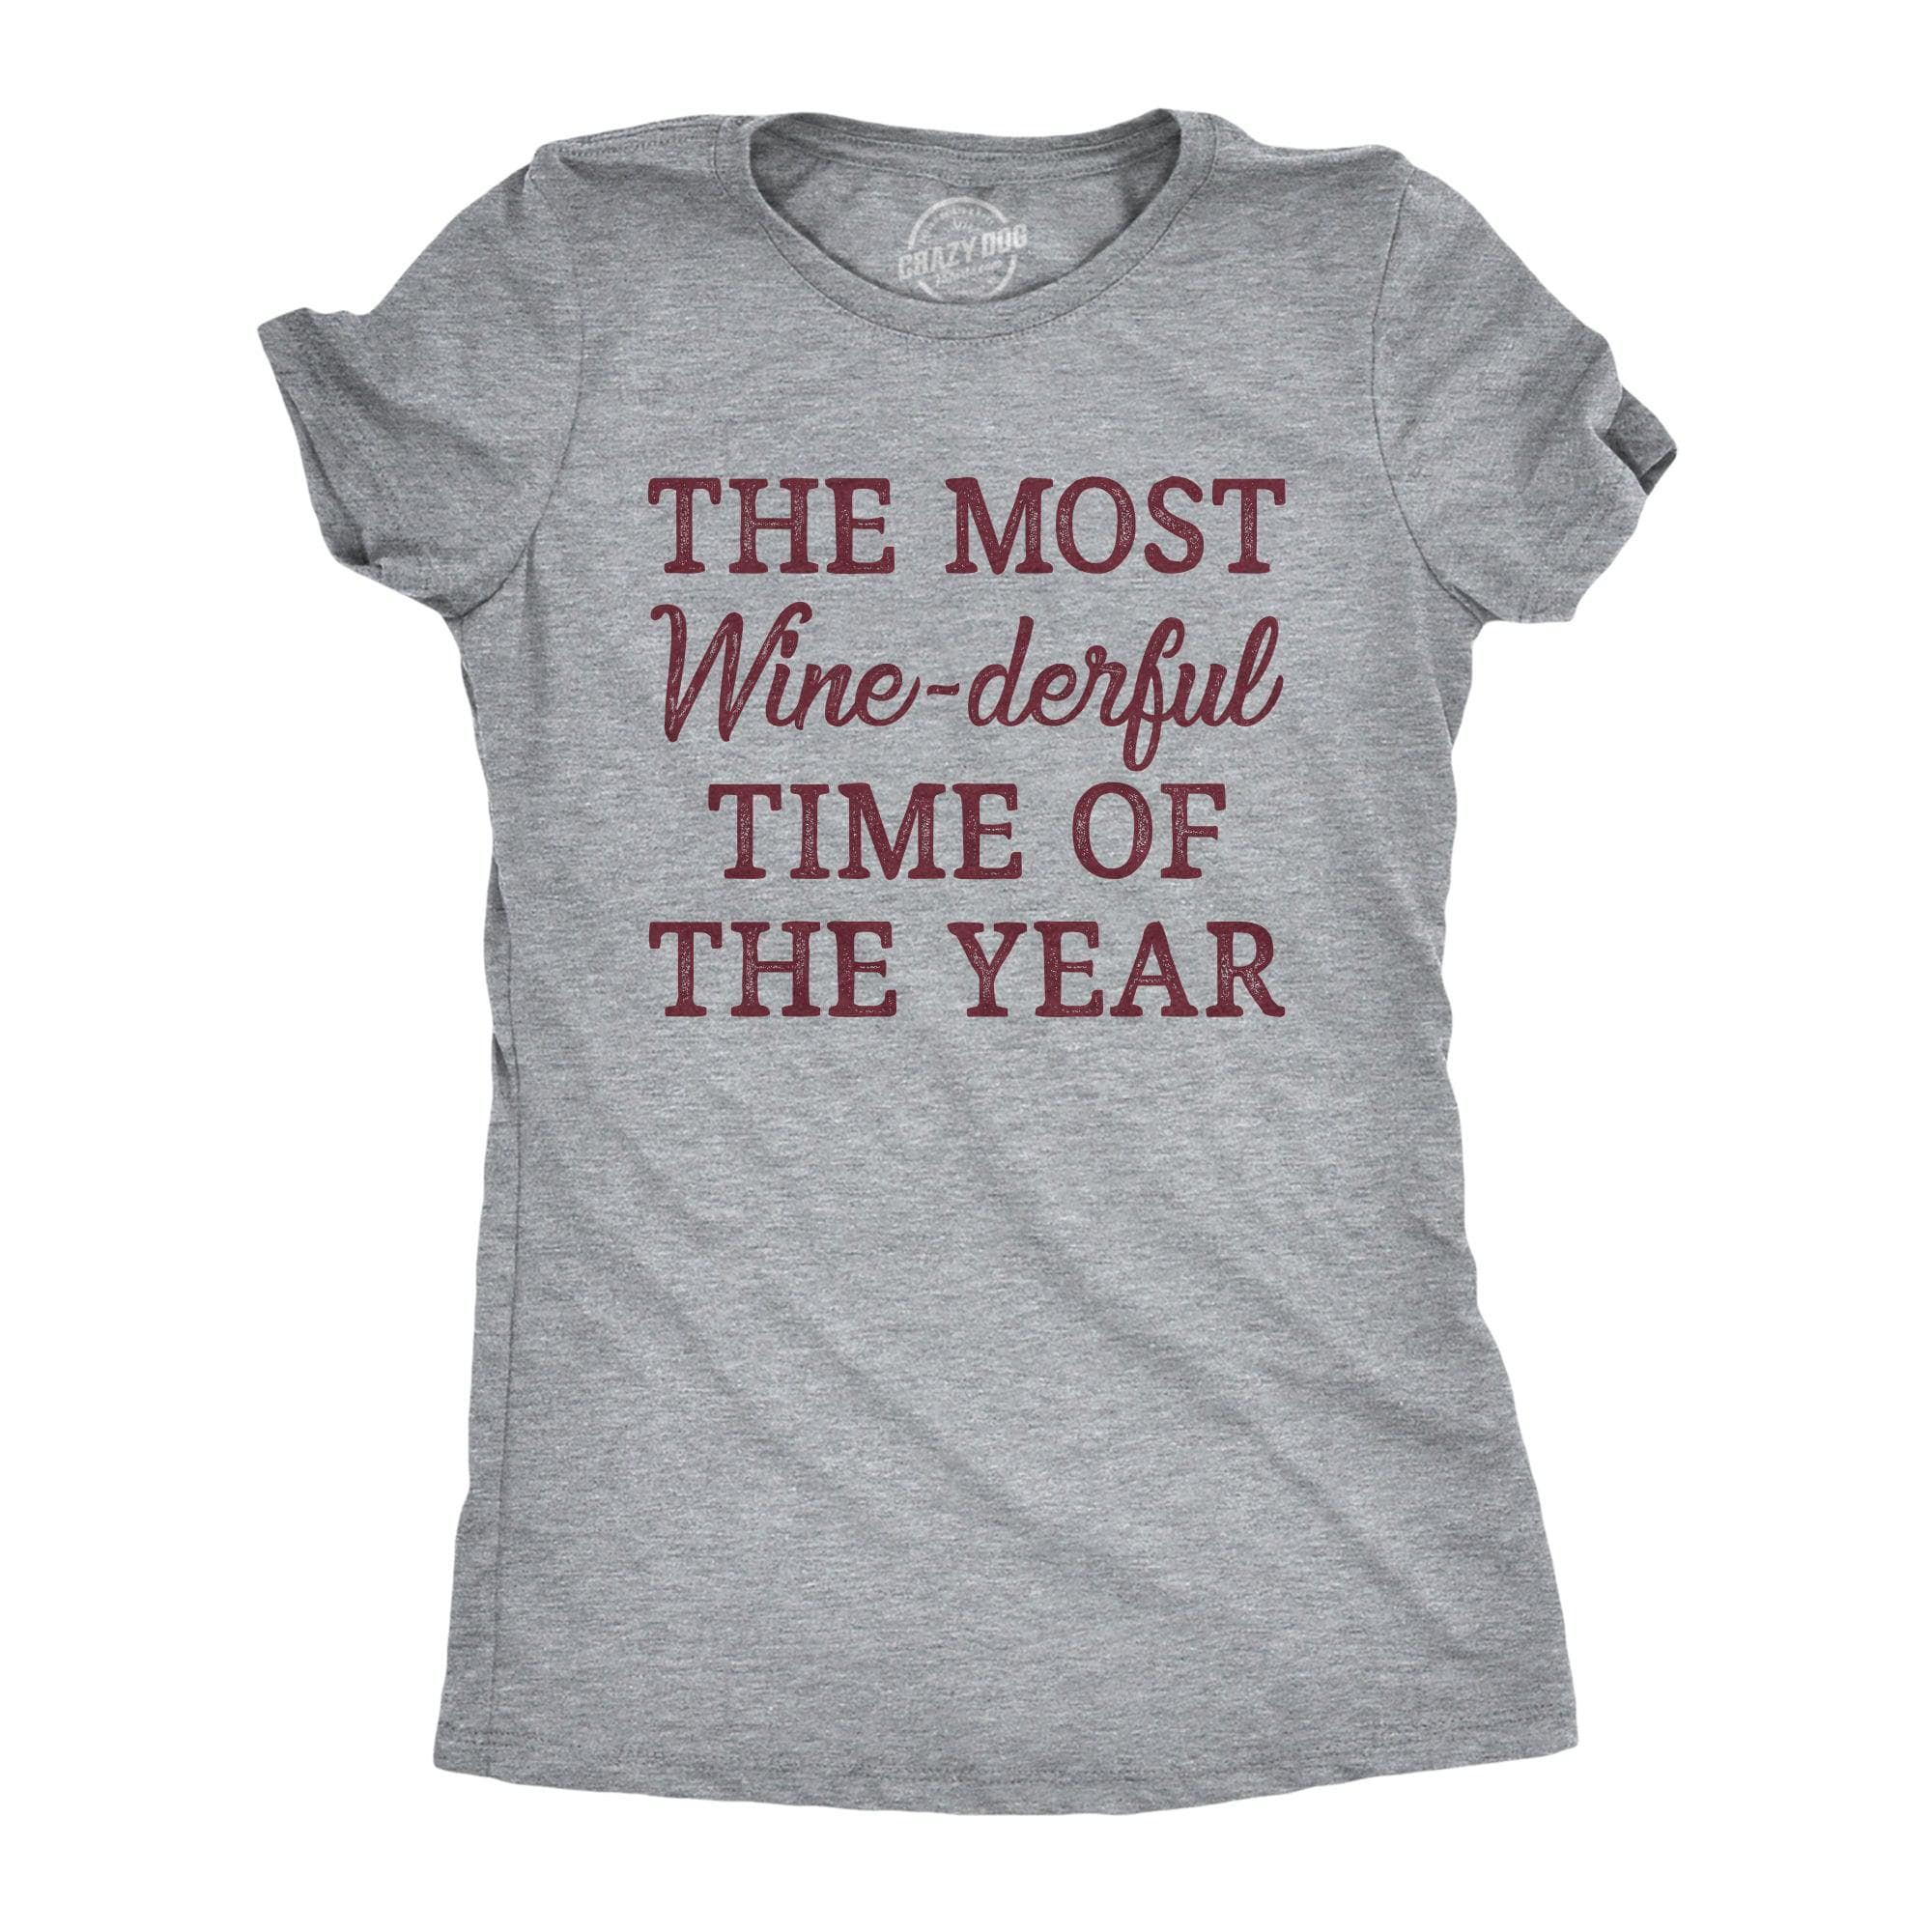 The Most Winederful Time Of The Year Women's Tshirt  -  Crazy Dog T-Shirts